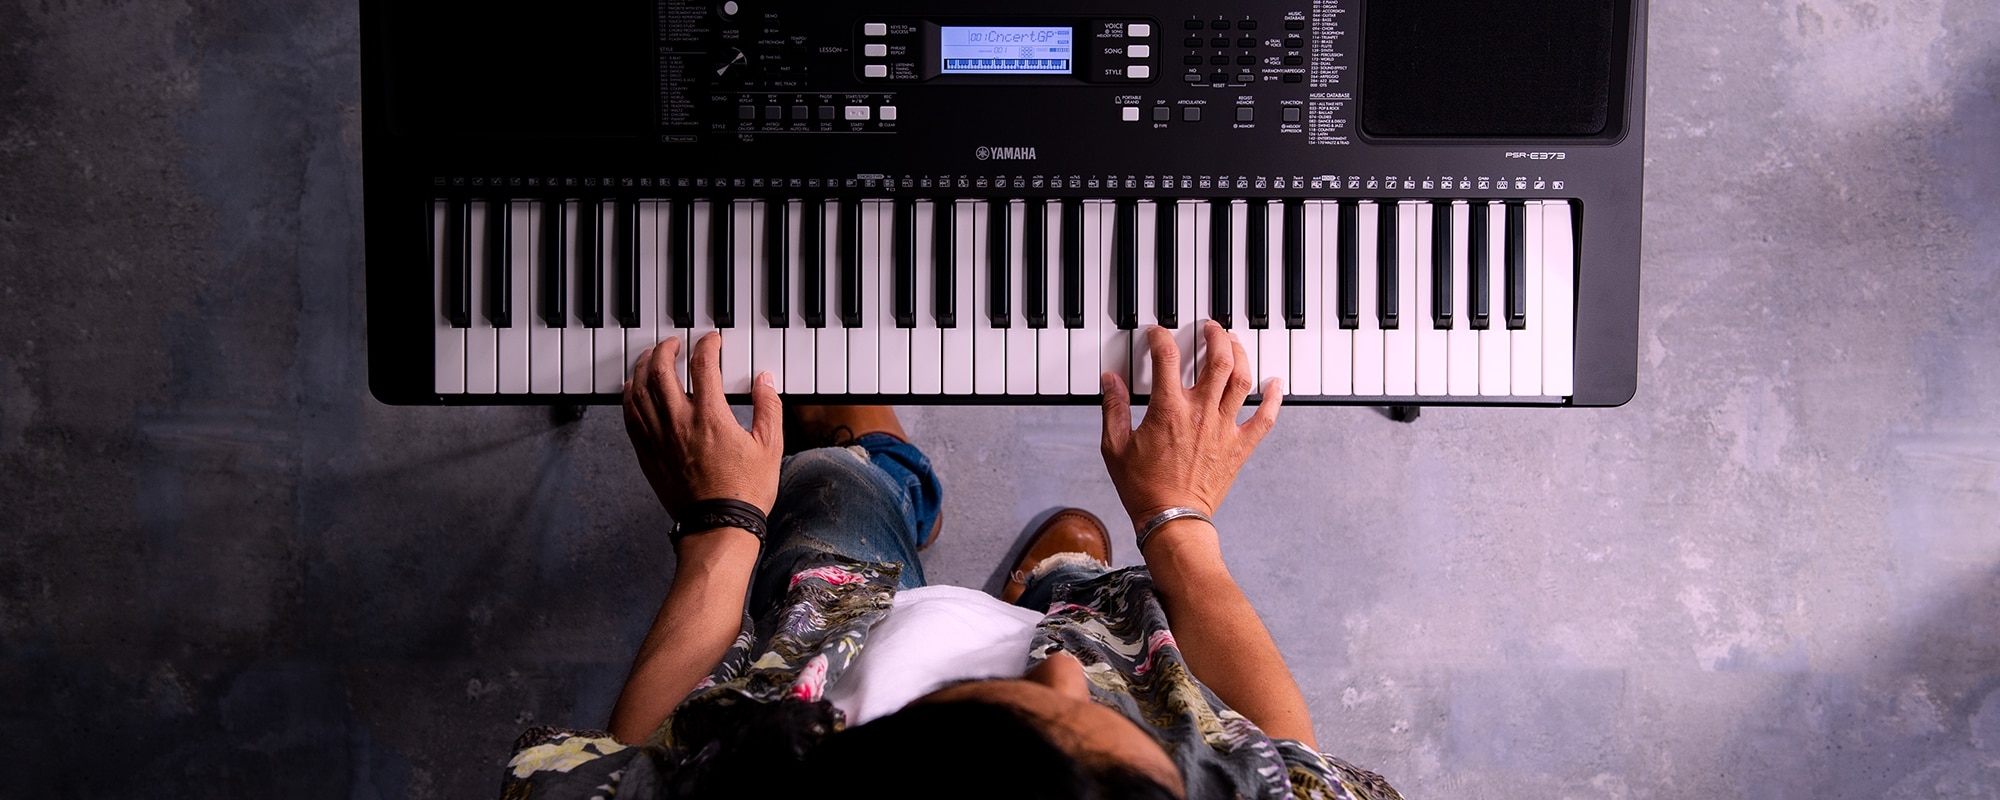 Yamaha PSR-E373//YPT-370Overview Video, The new Yamaha PSR-E373 is  equipped with a touch-sensitive keyboard and an all-new tone generator LSI  that delivers an amazing array of high-quality, By Yamaha Music Gulf